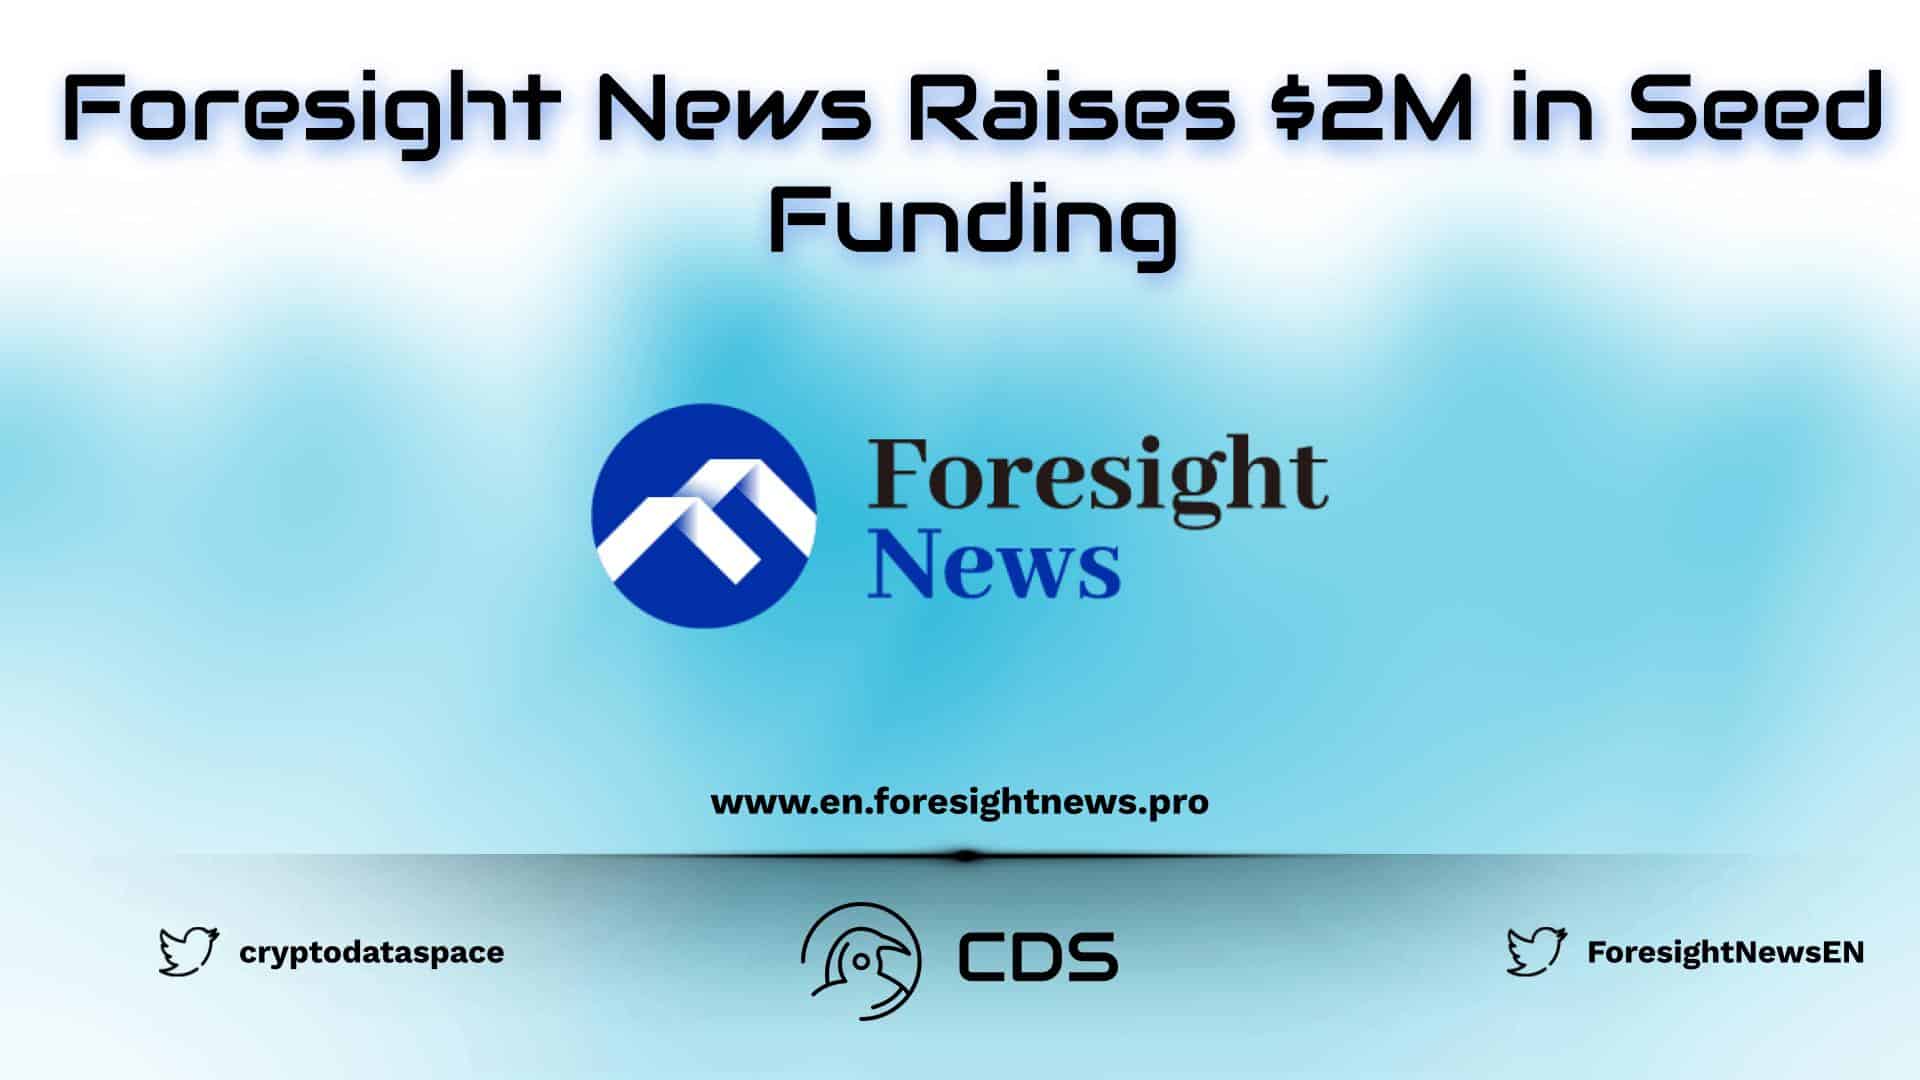 Foresight News Raises $2M in Seed Funding